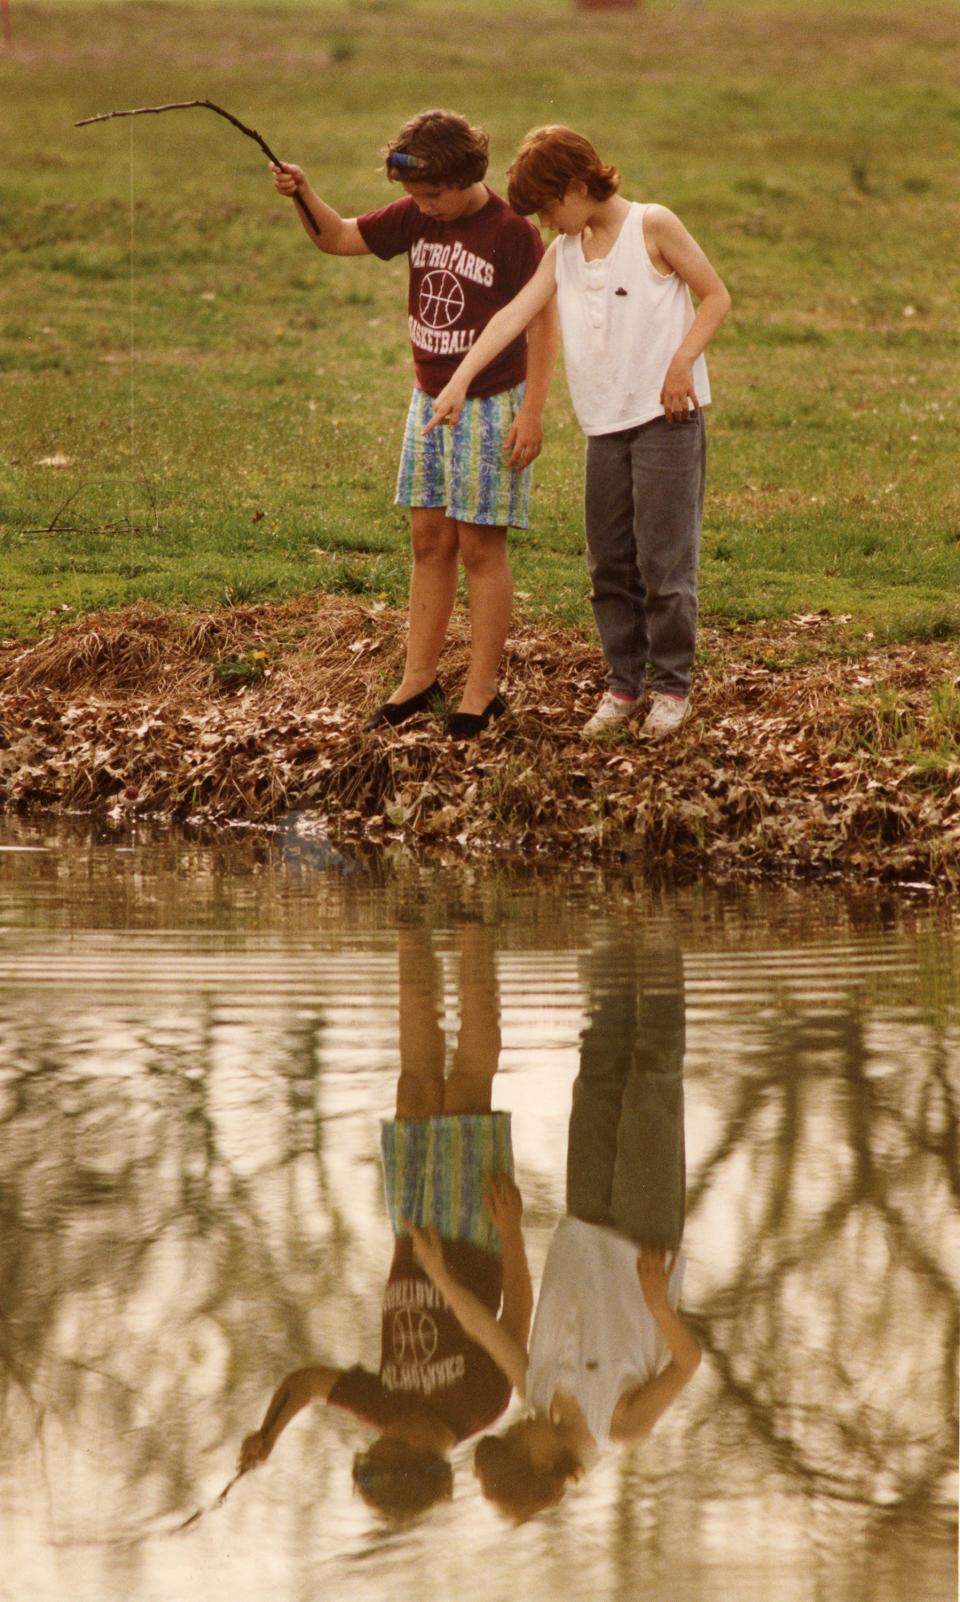 Melanie Nokes, 10, and her sister Serena Nokes, 8, hunt for fishing bait in the pond at Chickasaw Park in 1992. They plan to fish with sticks and rope after finding some bait.